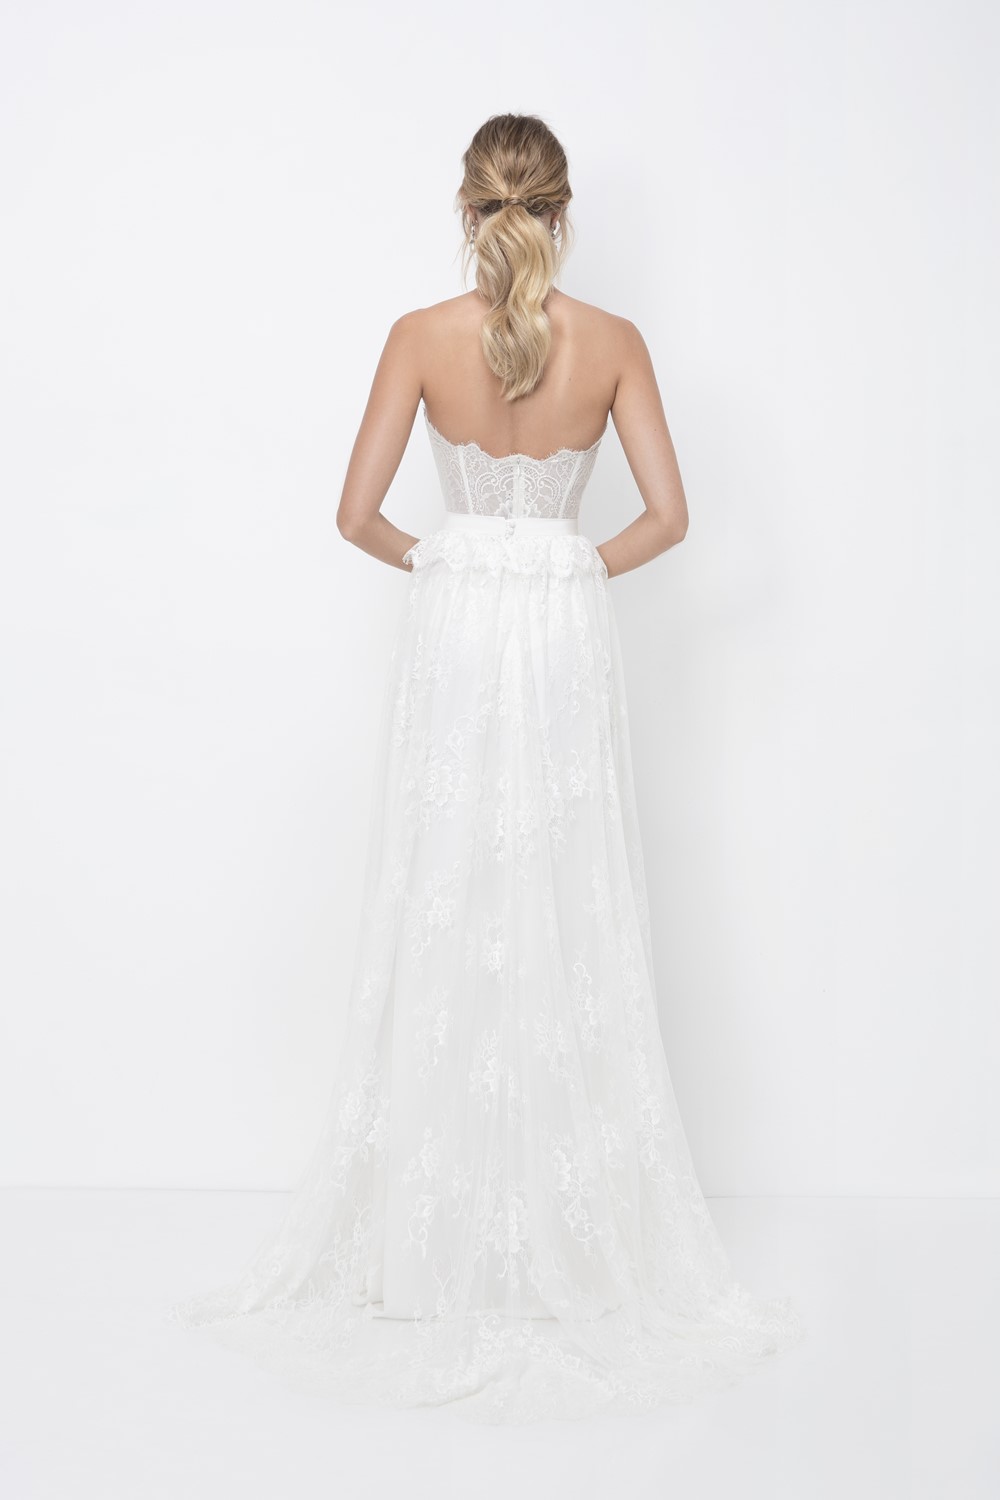 Emilie Wedding Dress from Lihi Hod's 2018 Bridal Collection